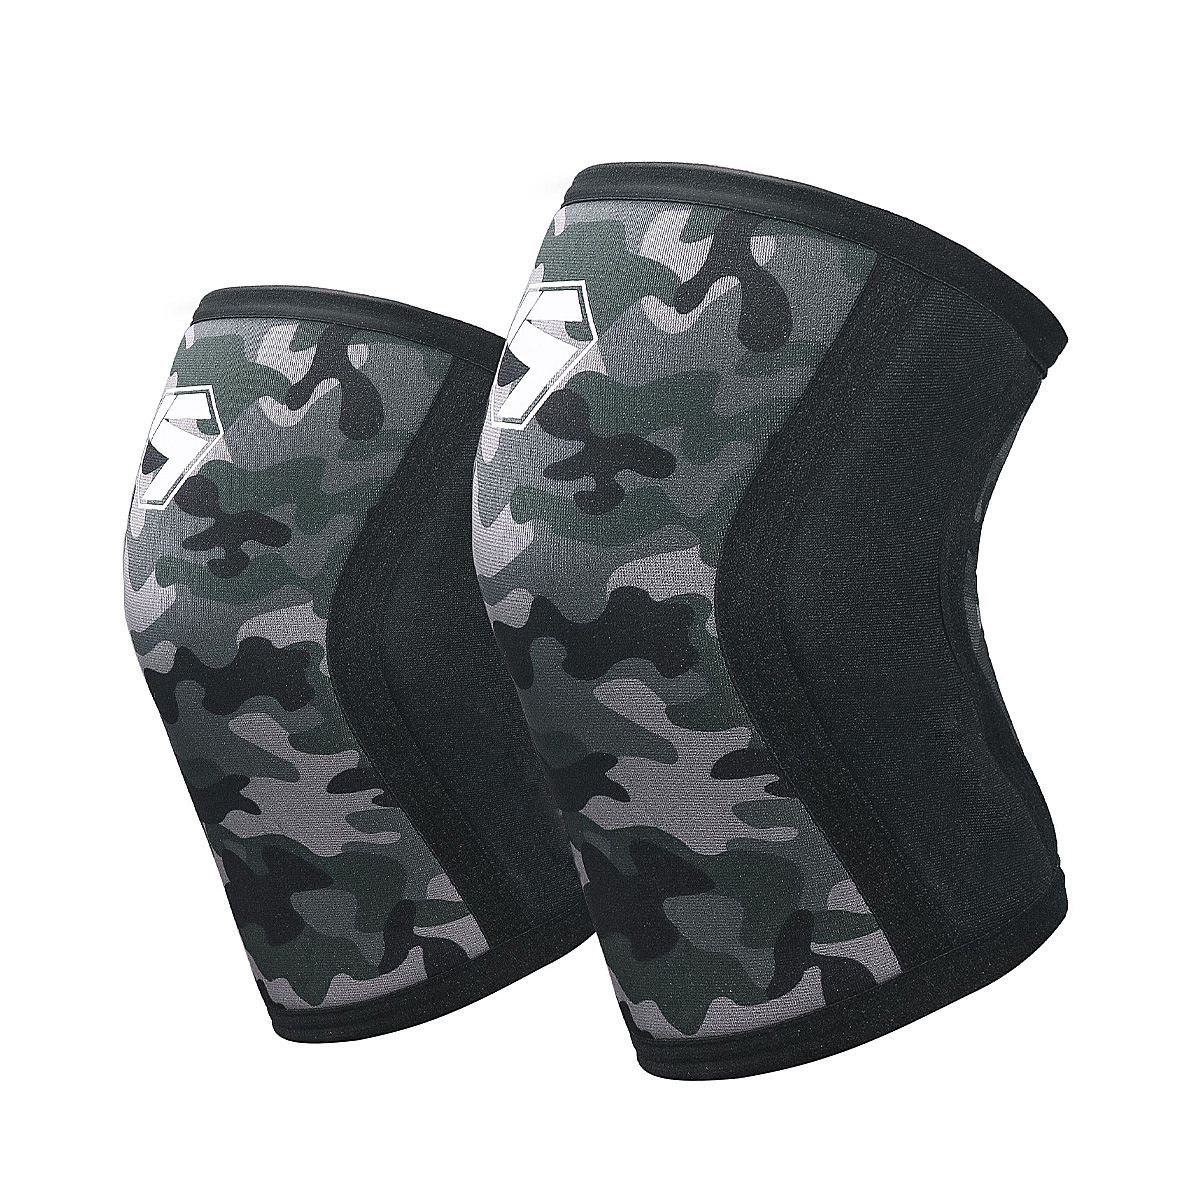 Breathable Neoprene Thick Knee Pads For Weightlifting